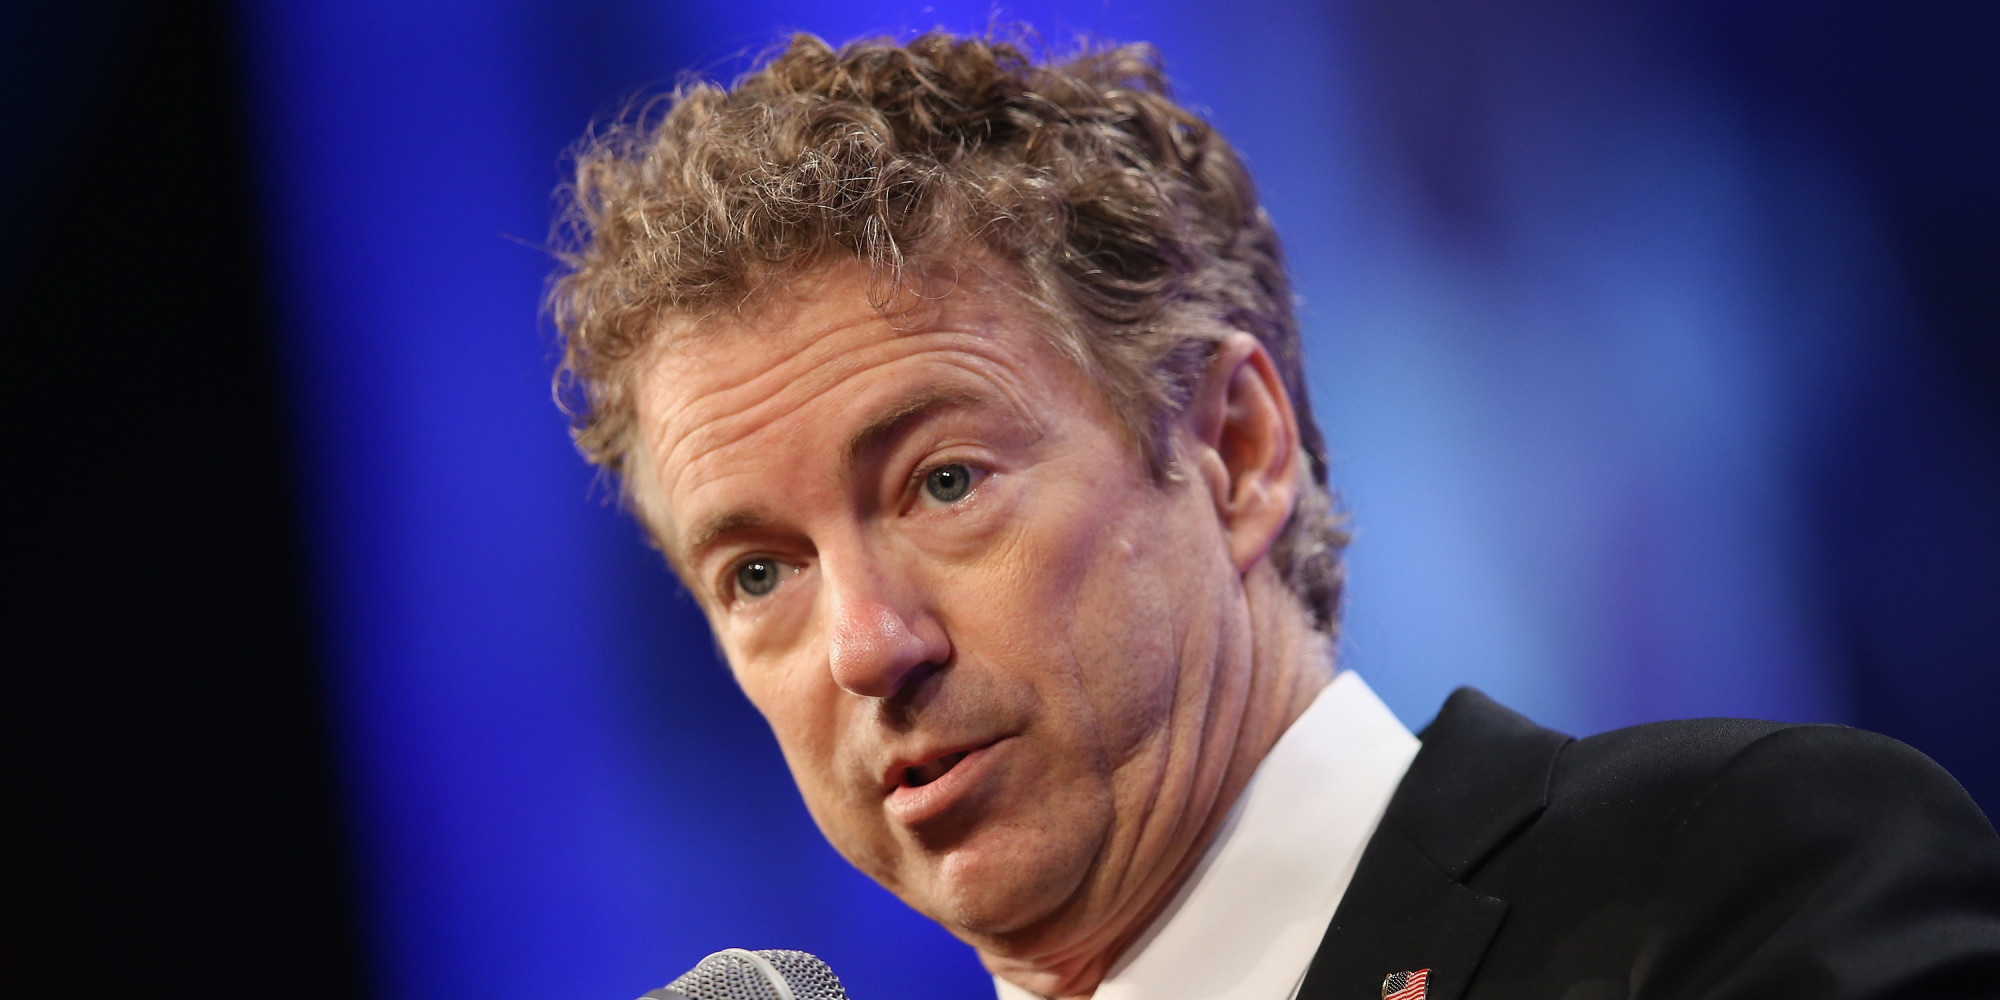 You know Rand Paul DOES kind of look like a lizard if you really look at him.2000 x 1000